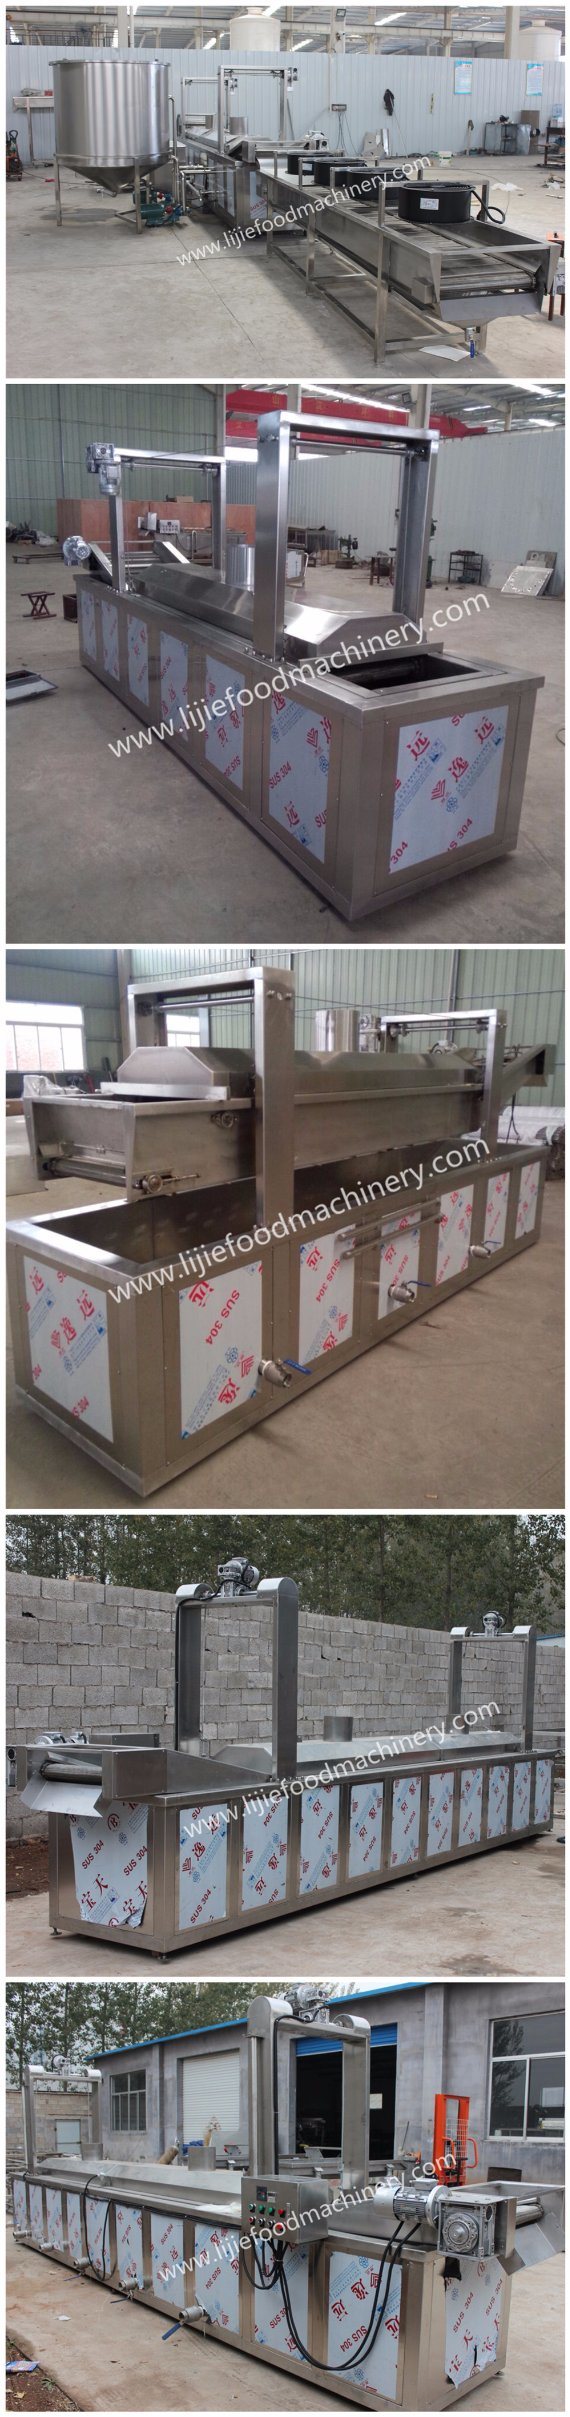 Doughnut Assembly Frying Machine/The Expanded Food Frying Machine